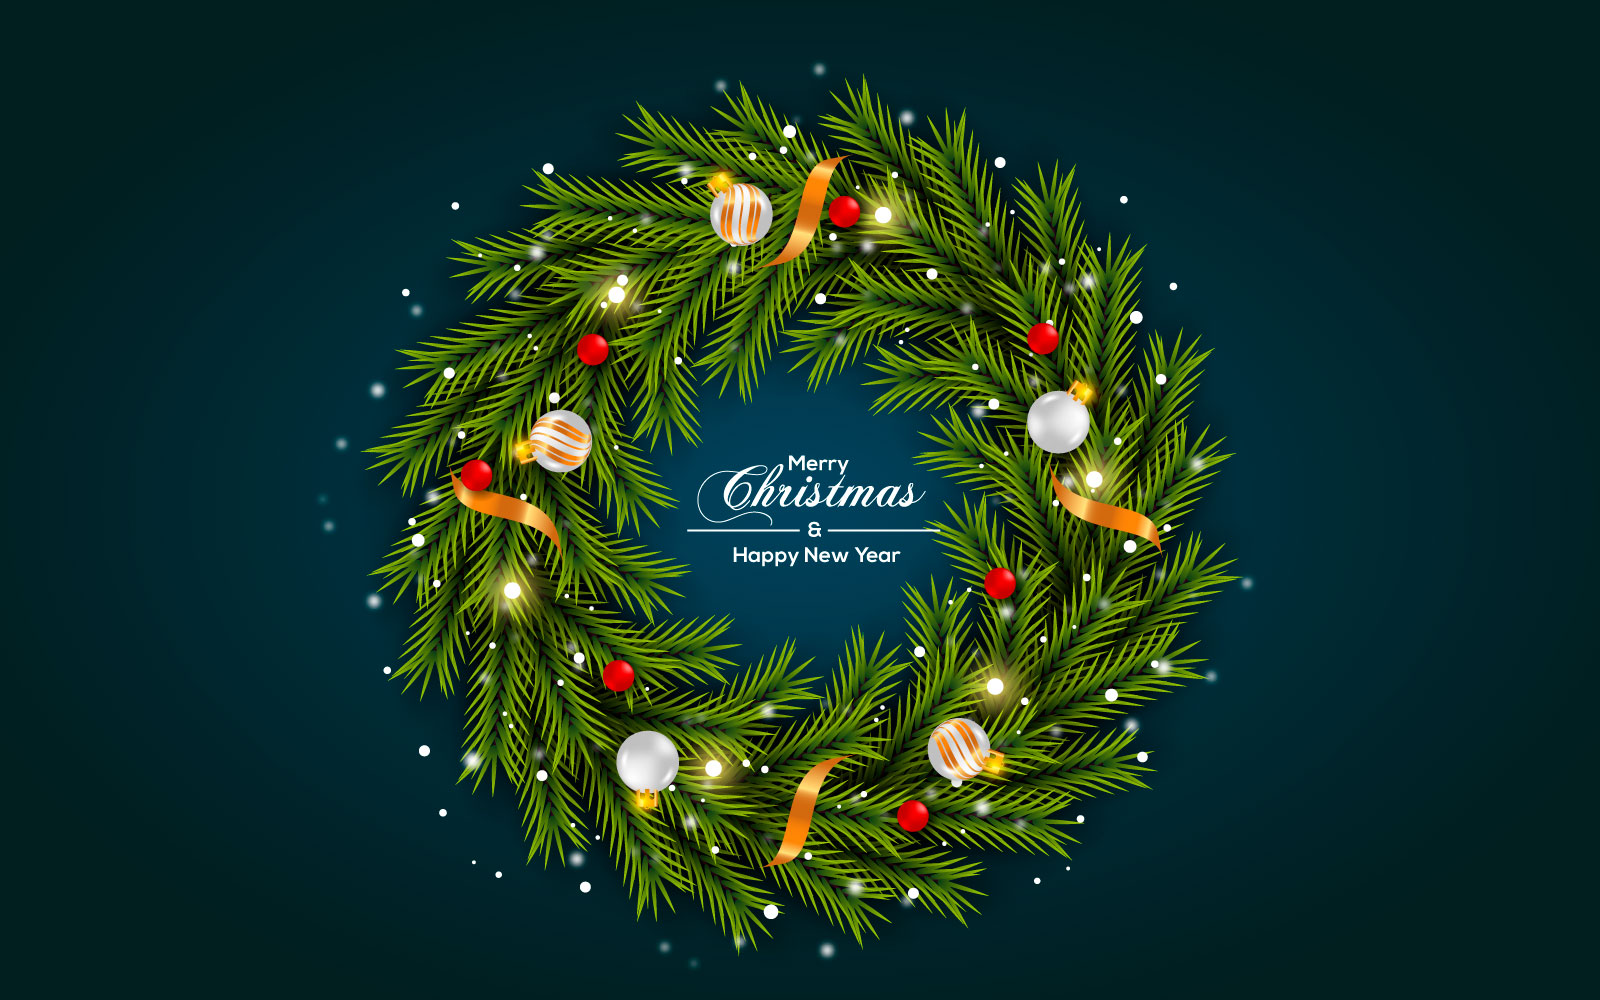 t christmas wishes wreath with decorated holiday wreath